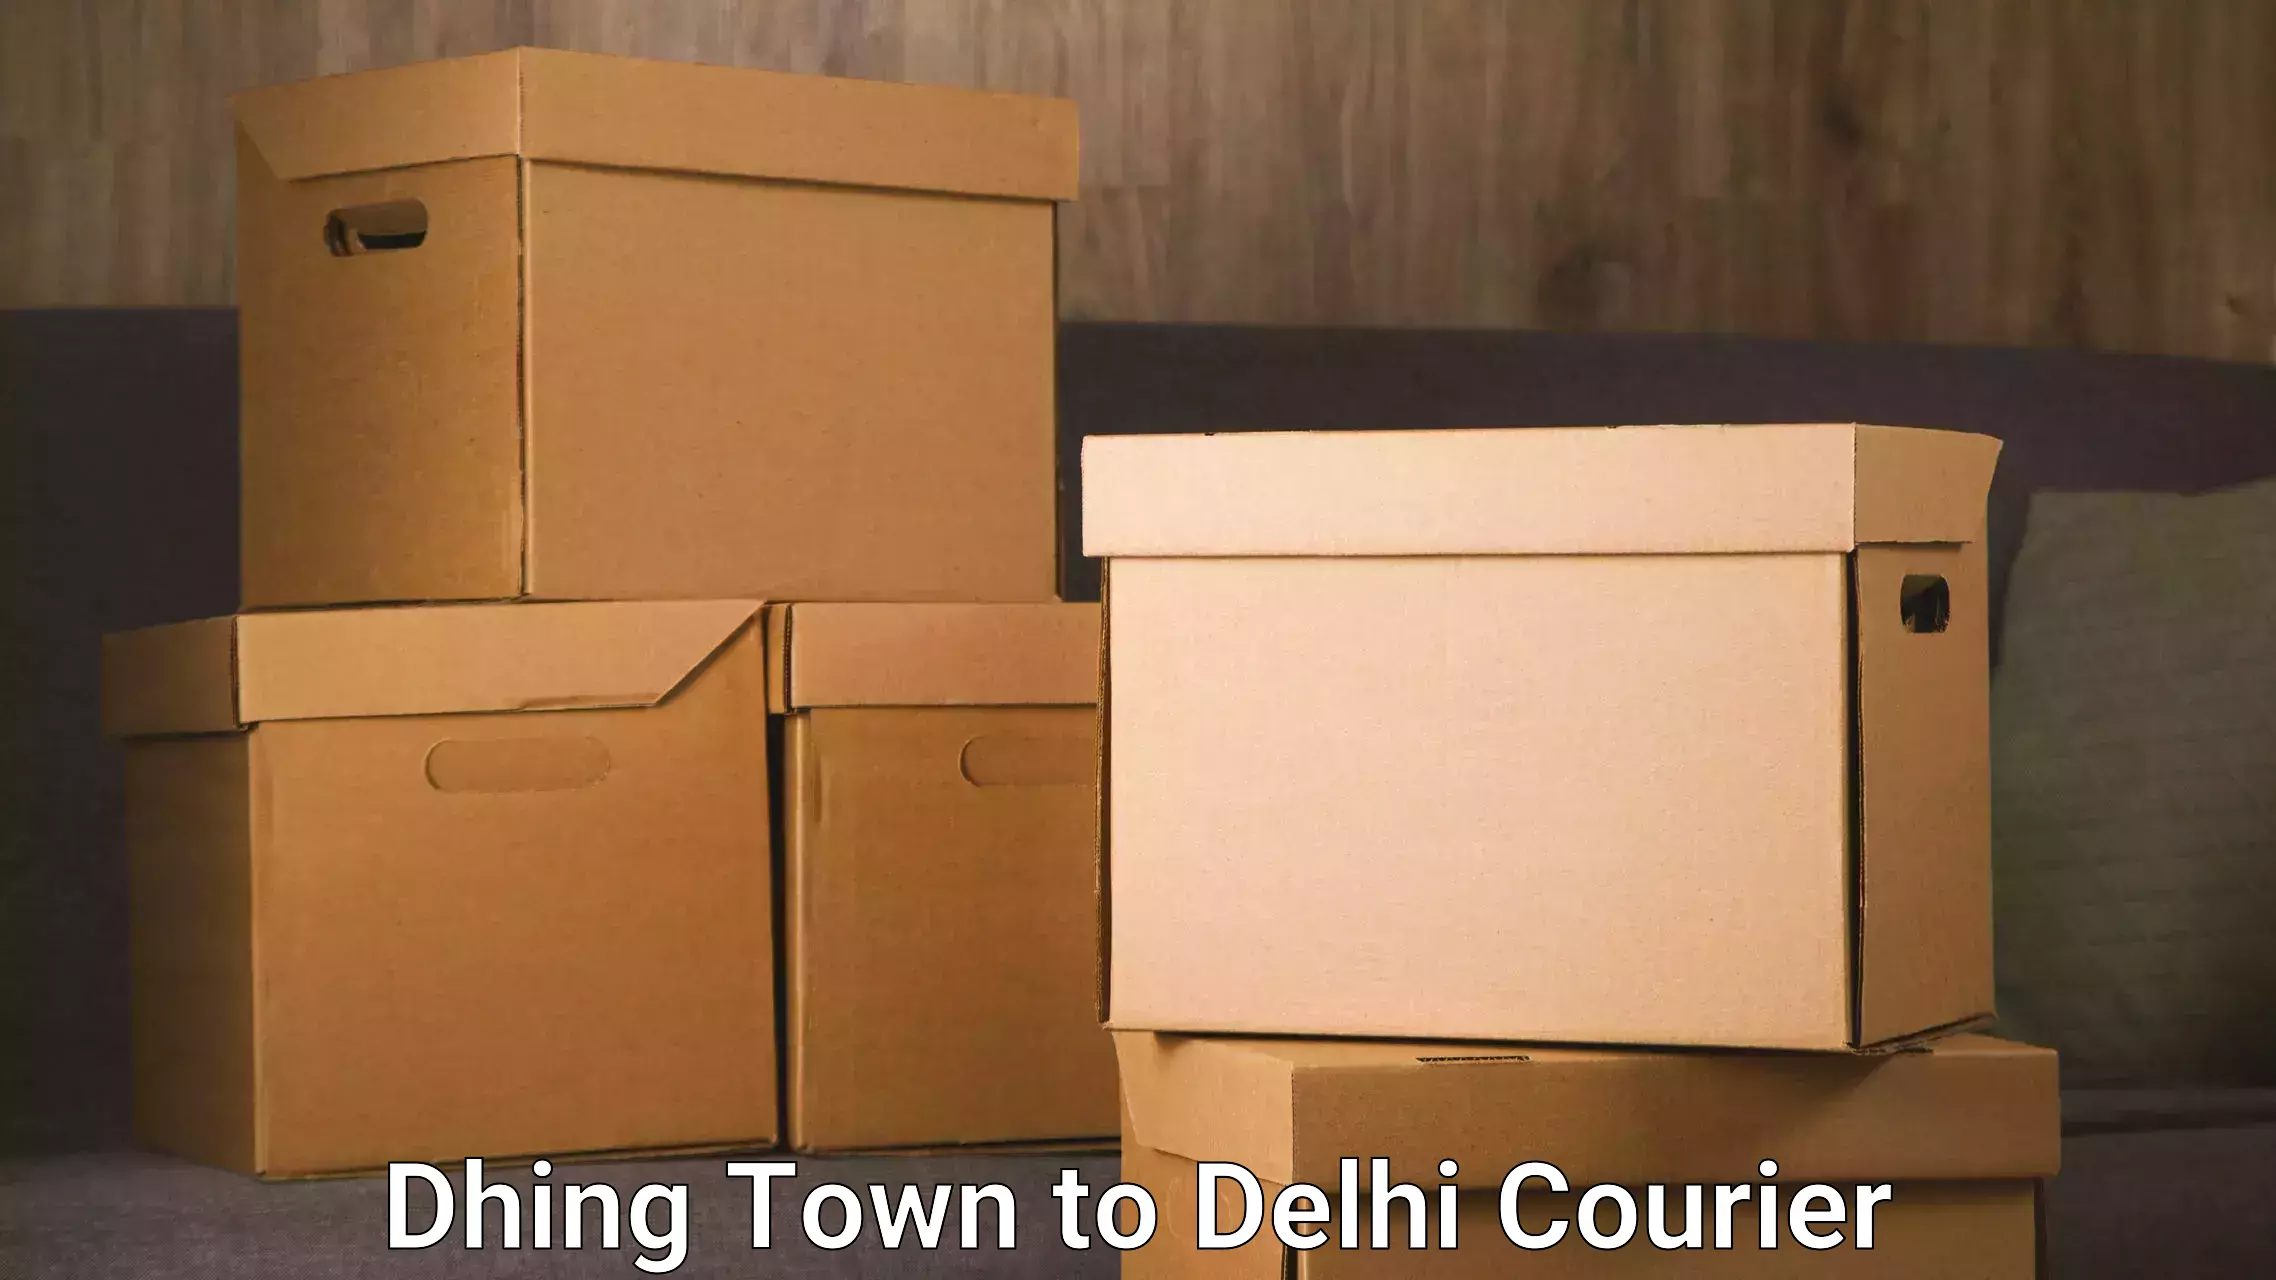 Express postal services Dhing Town to University of Delhi